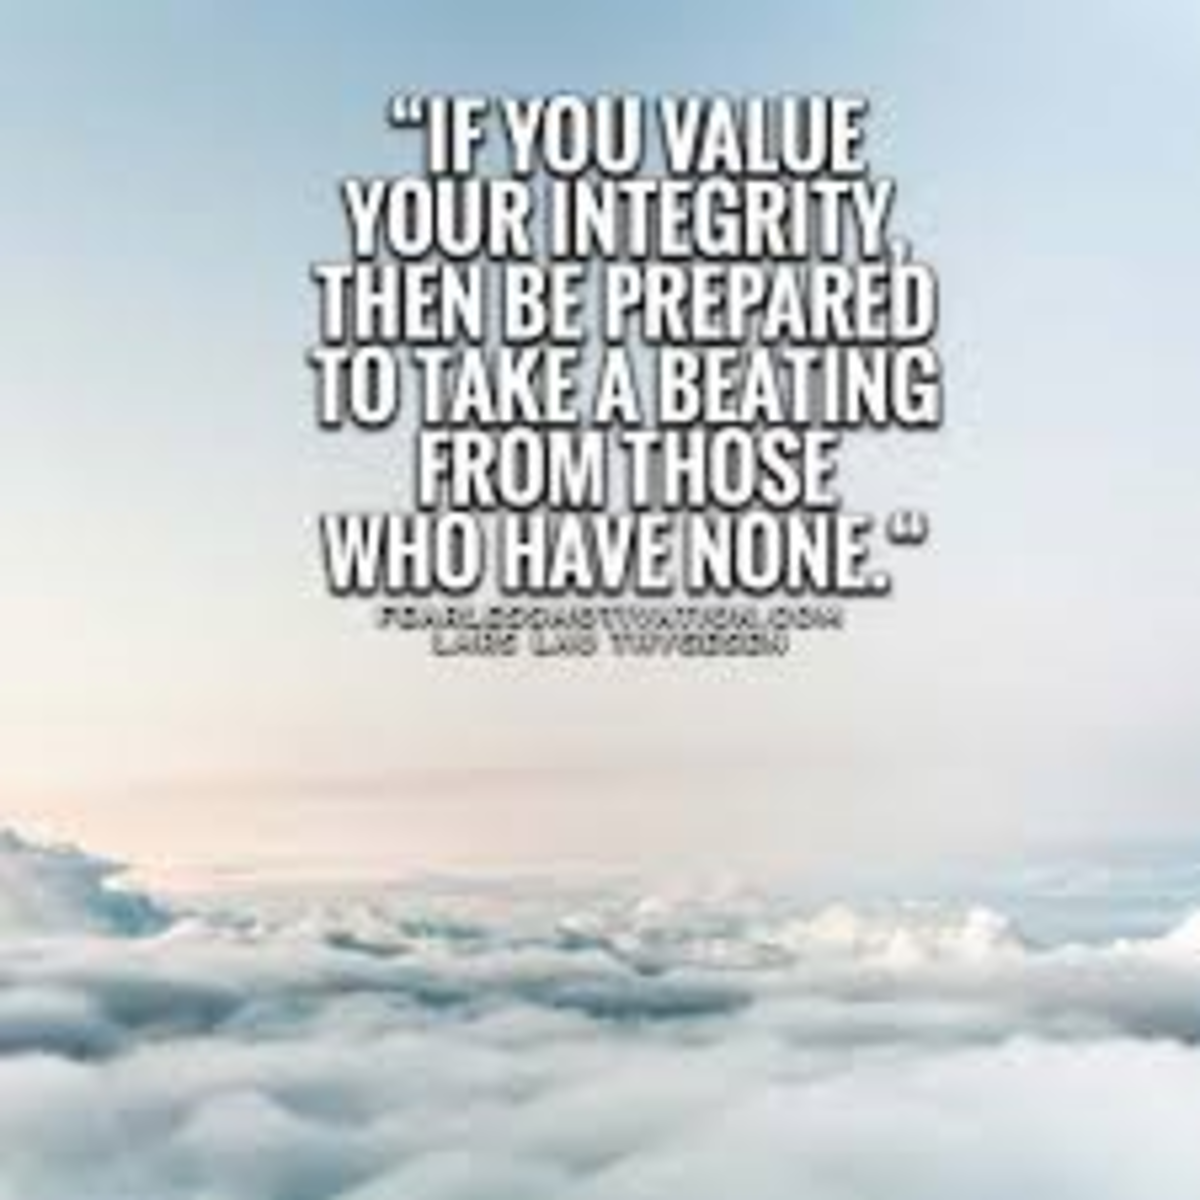 integrity-is-a-must